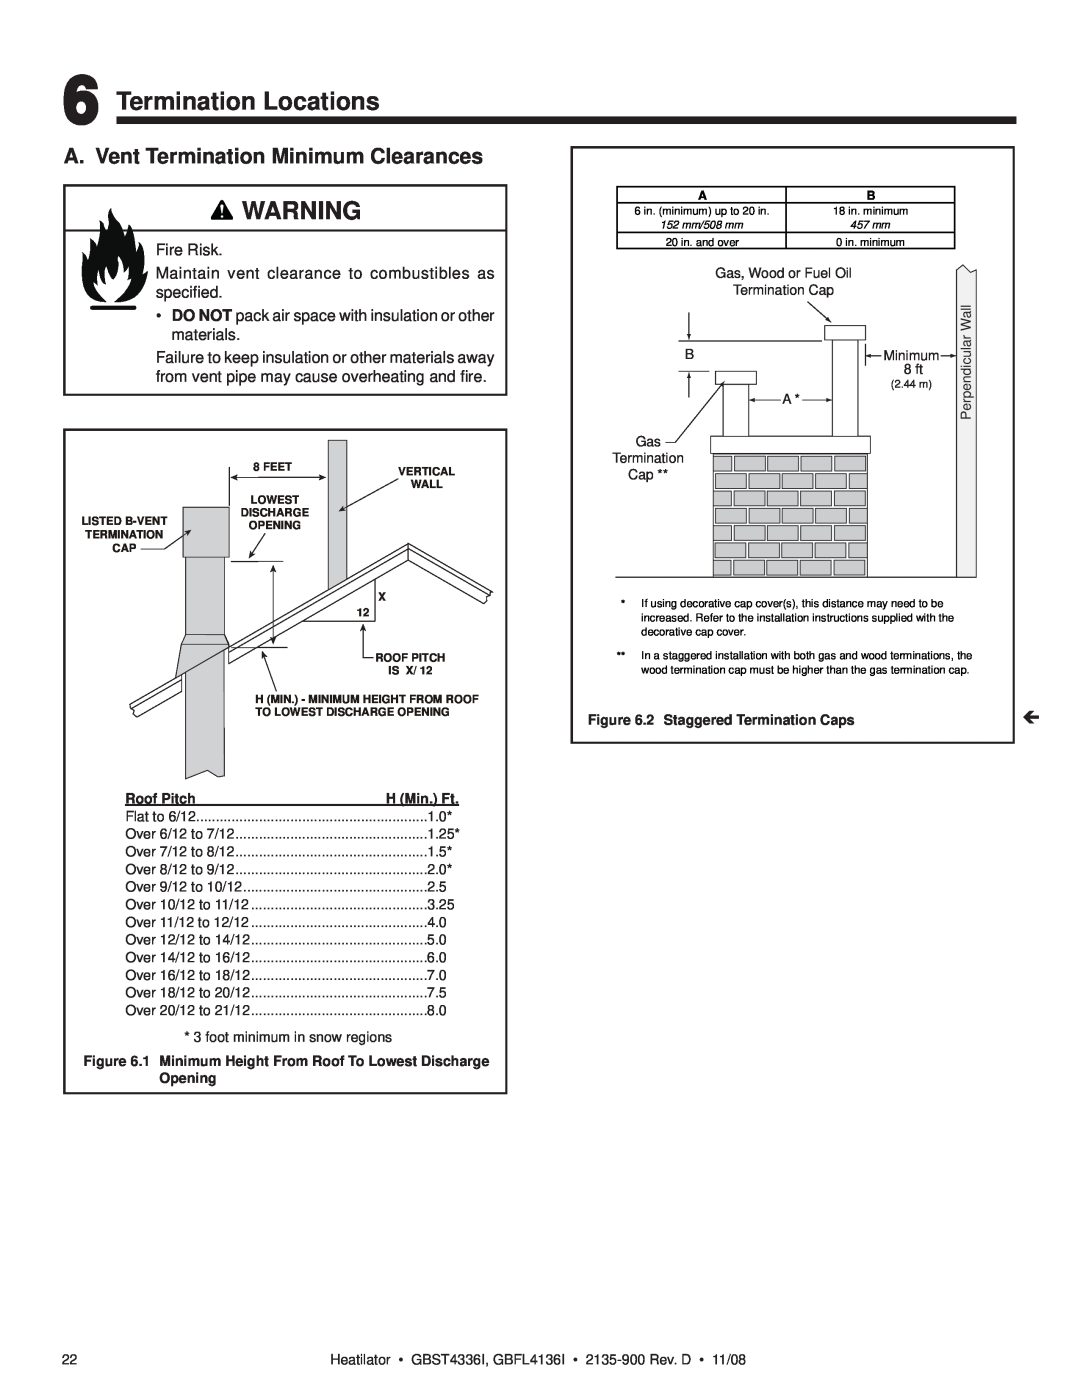 Hearth and Home Technologies GBFL4136I Termination Locations, A. Vent Termination Minimum Clearances, Roof Pitch, 1.25 